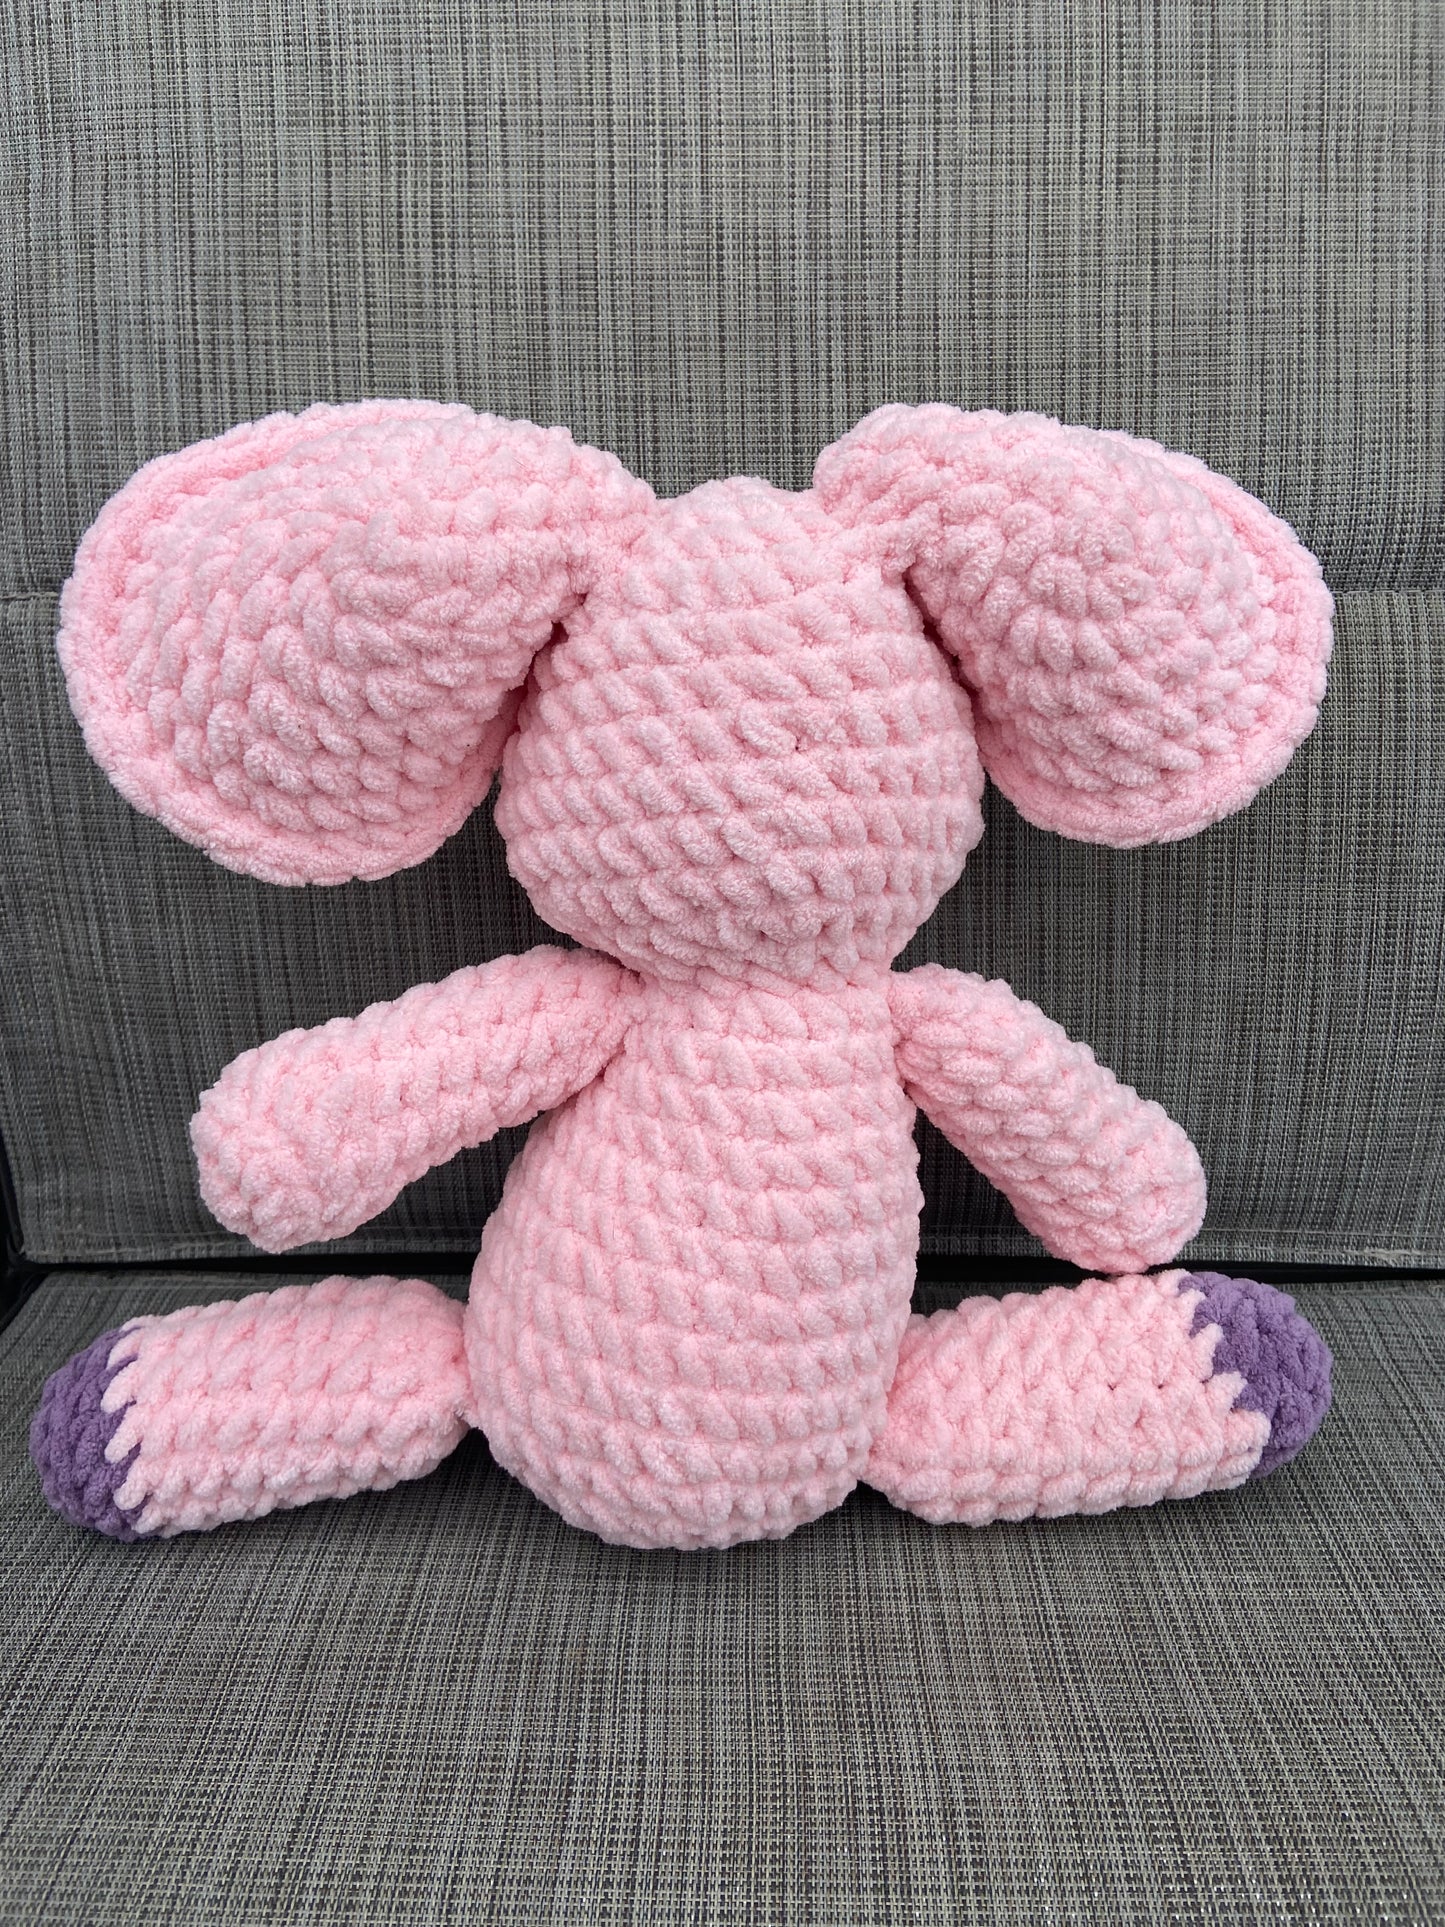 Handmade Crochet Pink Elephant: Charming and Cuddly Plush Toy for Kids